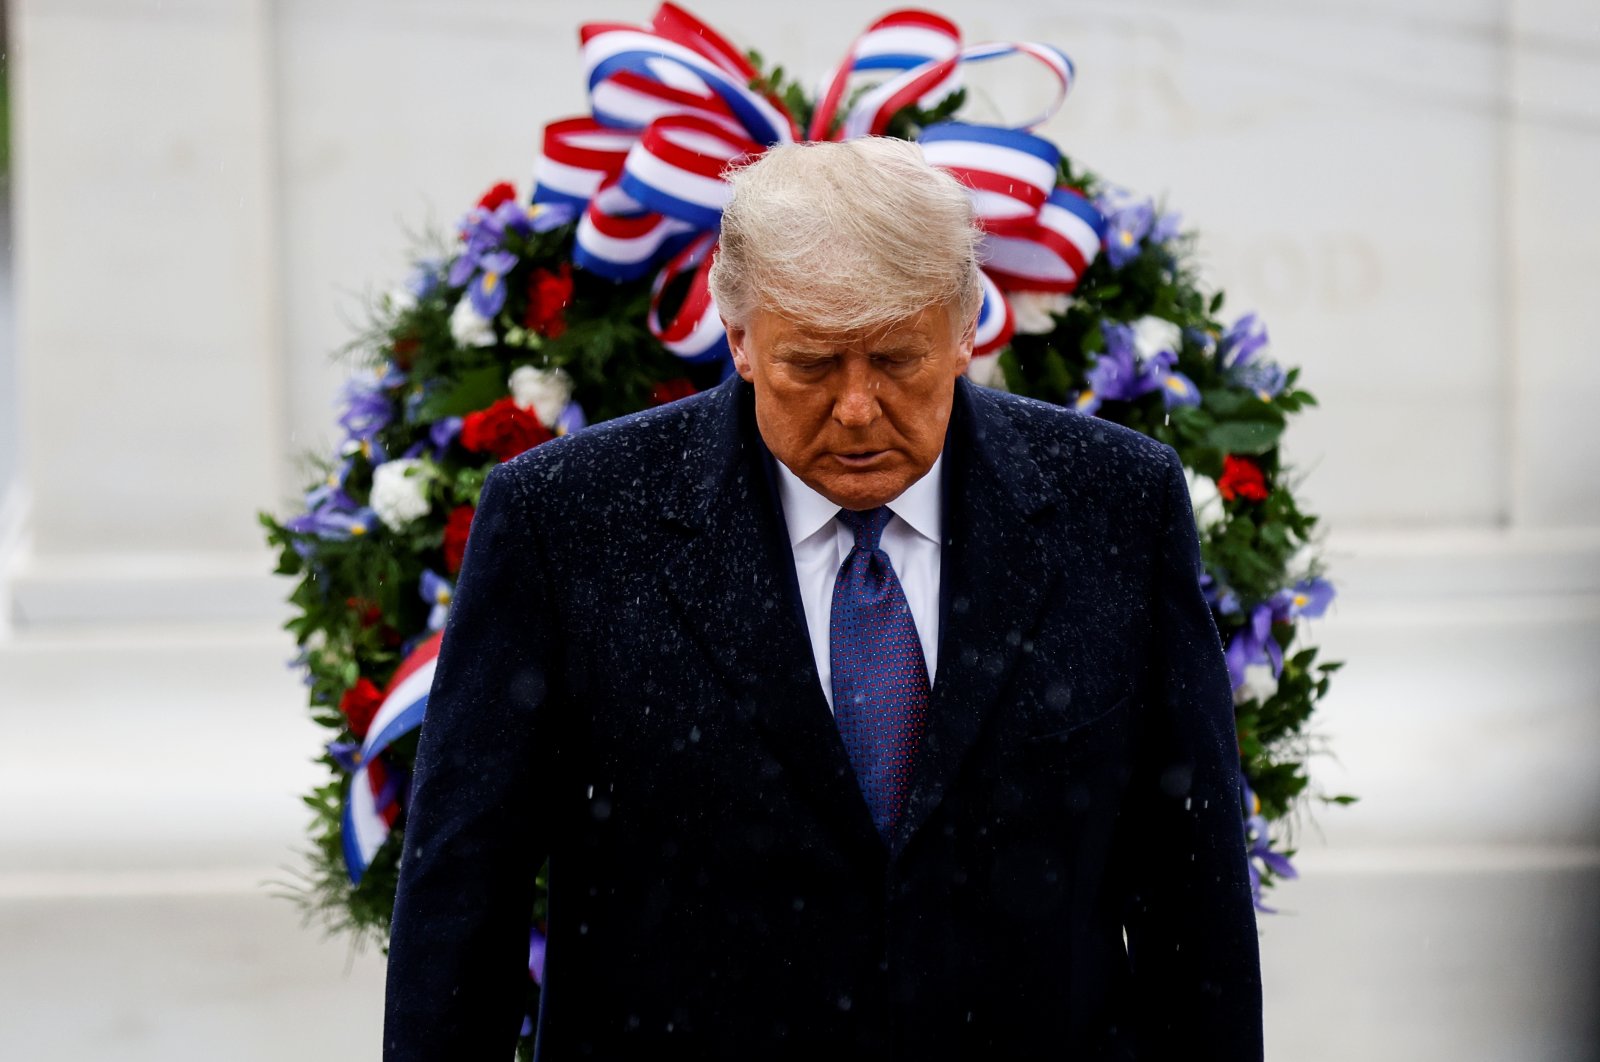 U.S. President Donald Trump turns away in the rain after laying a wreath at the Tomb of the Unknown Soldier in Arlington, Virginia, U.S., on Veteran's Day, Nov. 11, 2020. (Reuters Photo)